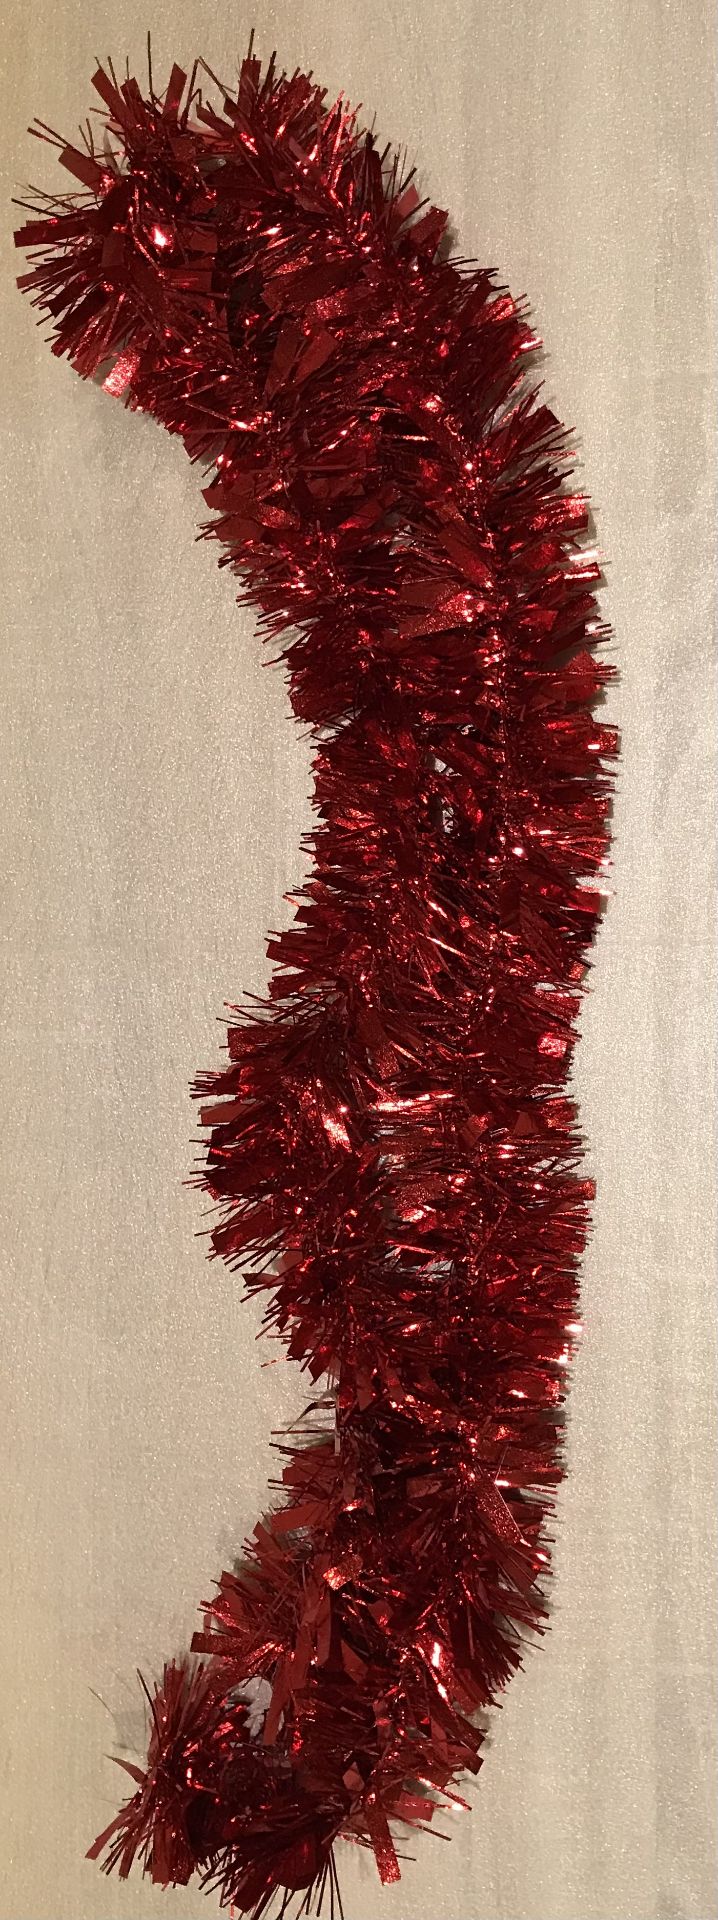 500 X Luxury Tinsel 1.8M 5 Colours Gold, Silver, Red, Blue, Green - Image 3 of 6